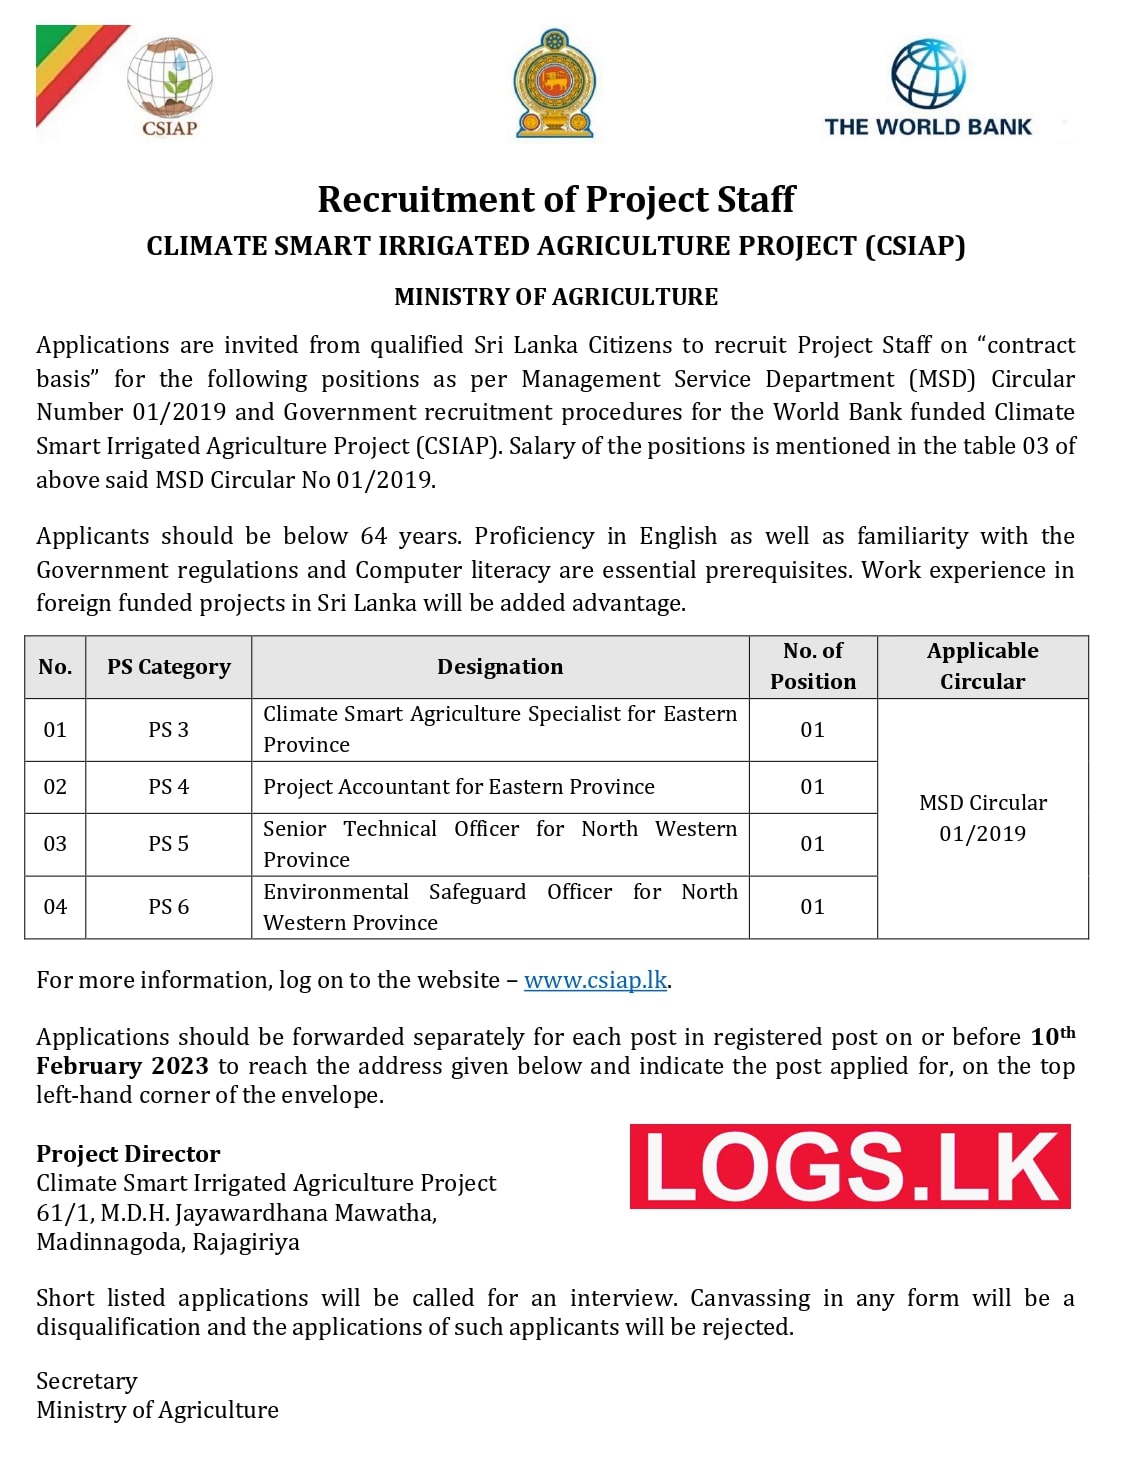 Climate Smart Irrigated Agriculture Project (CSIAP) Project Staff Job Vacancies 2023 Application Form Download